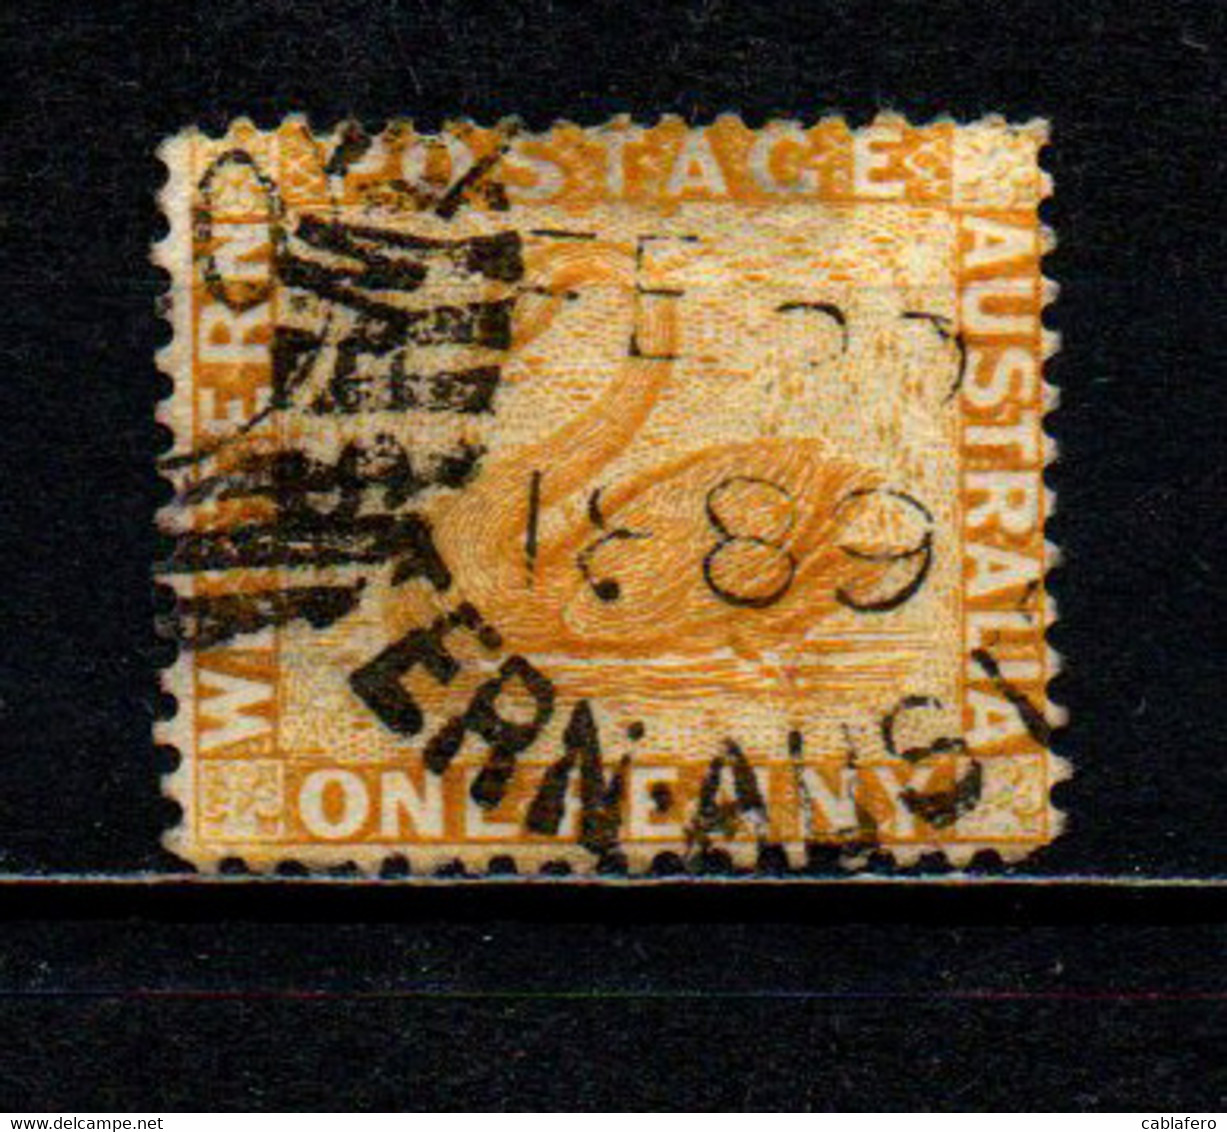 WESTERN AUSTRALIA - 1882 - Swan - 1p Ocher Yellow - Wmkd. Crown And C A - Perf. 14 - USATO - Used Stamps